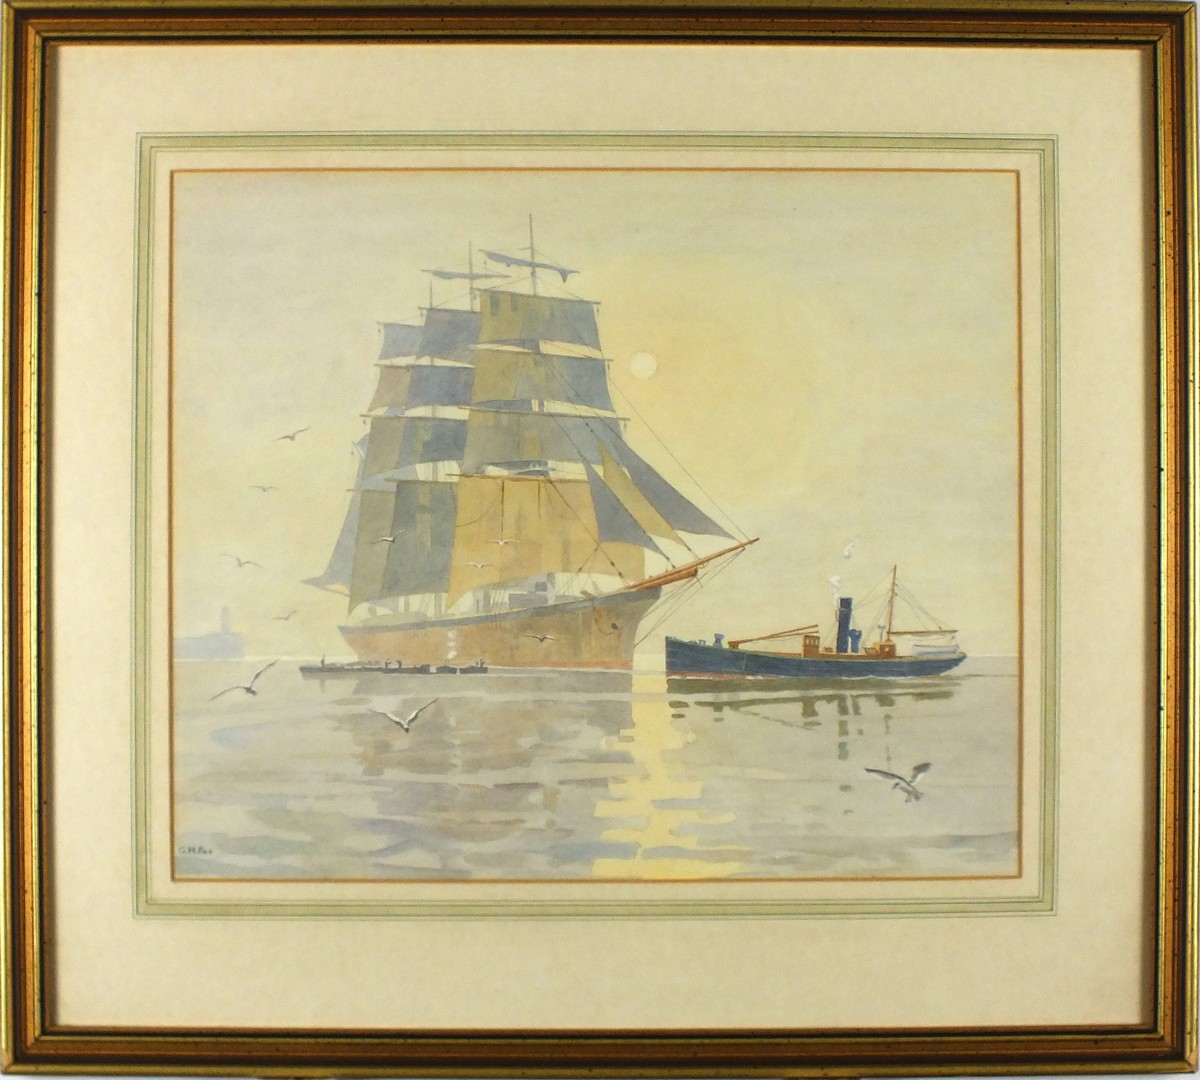 George H* FOX, Watercolour, A four masted square rigged ship at anchor approached by a tug, - Image 2 of 2